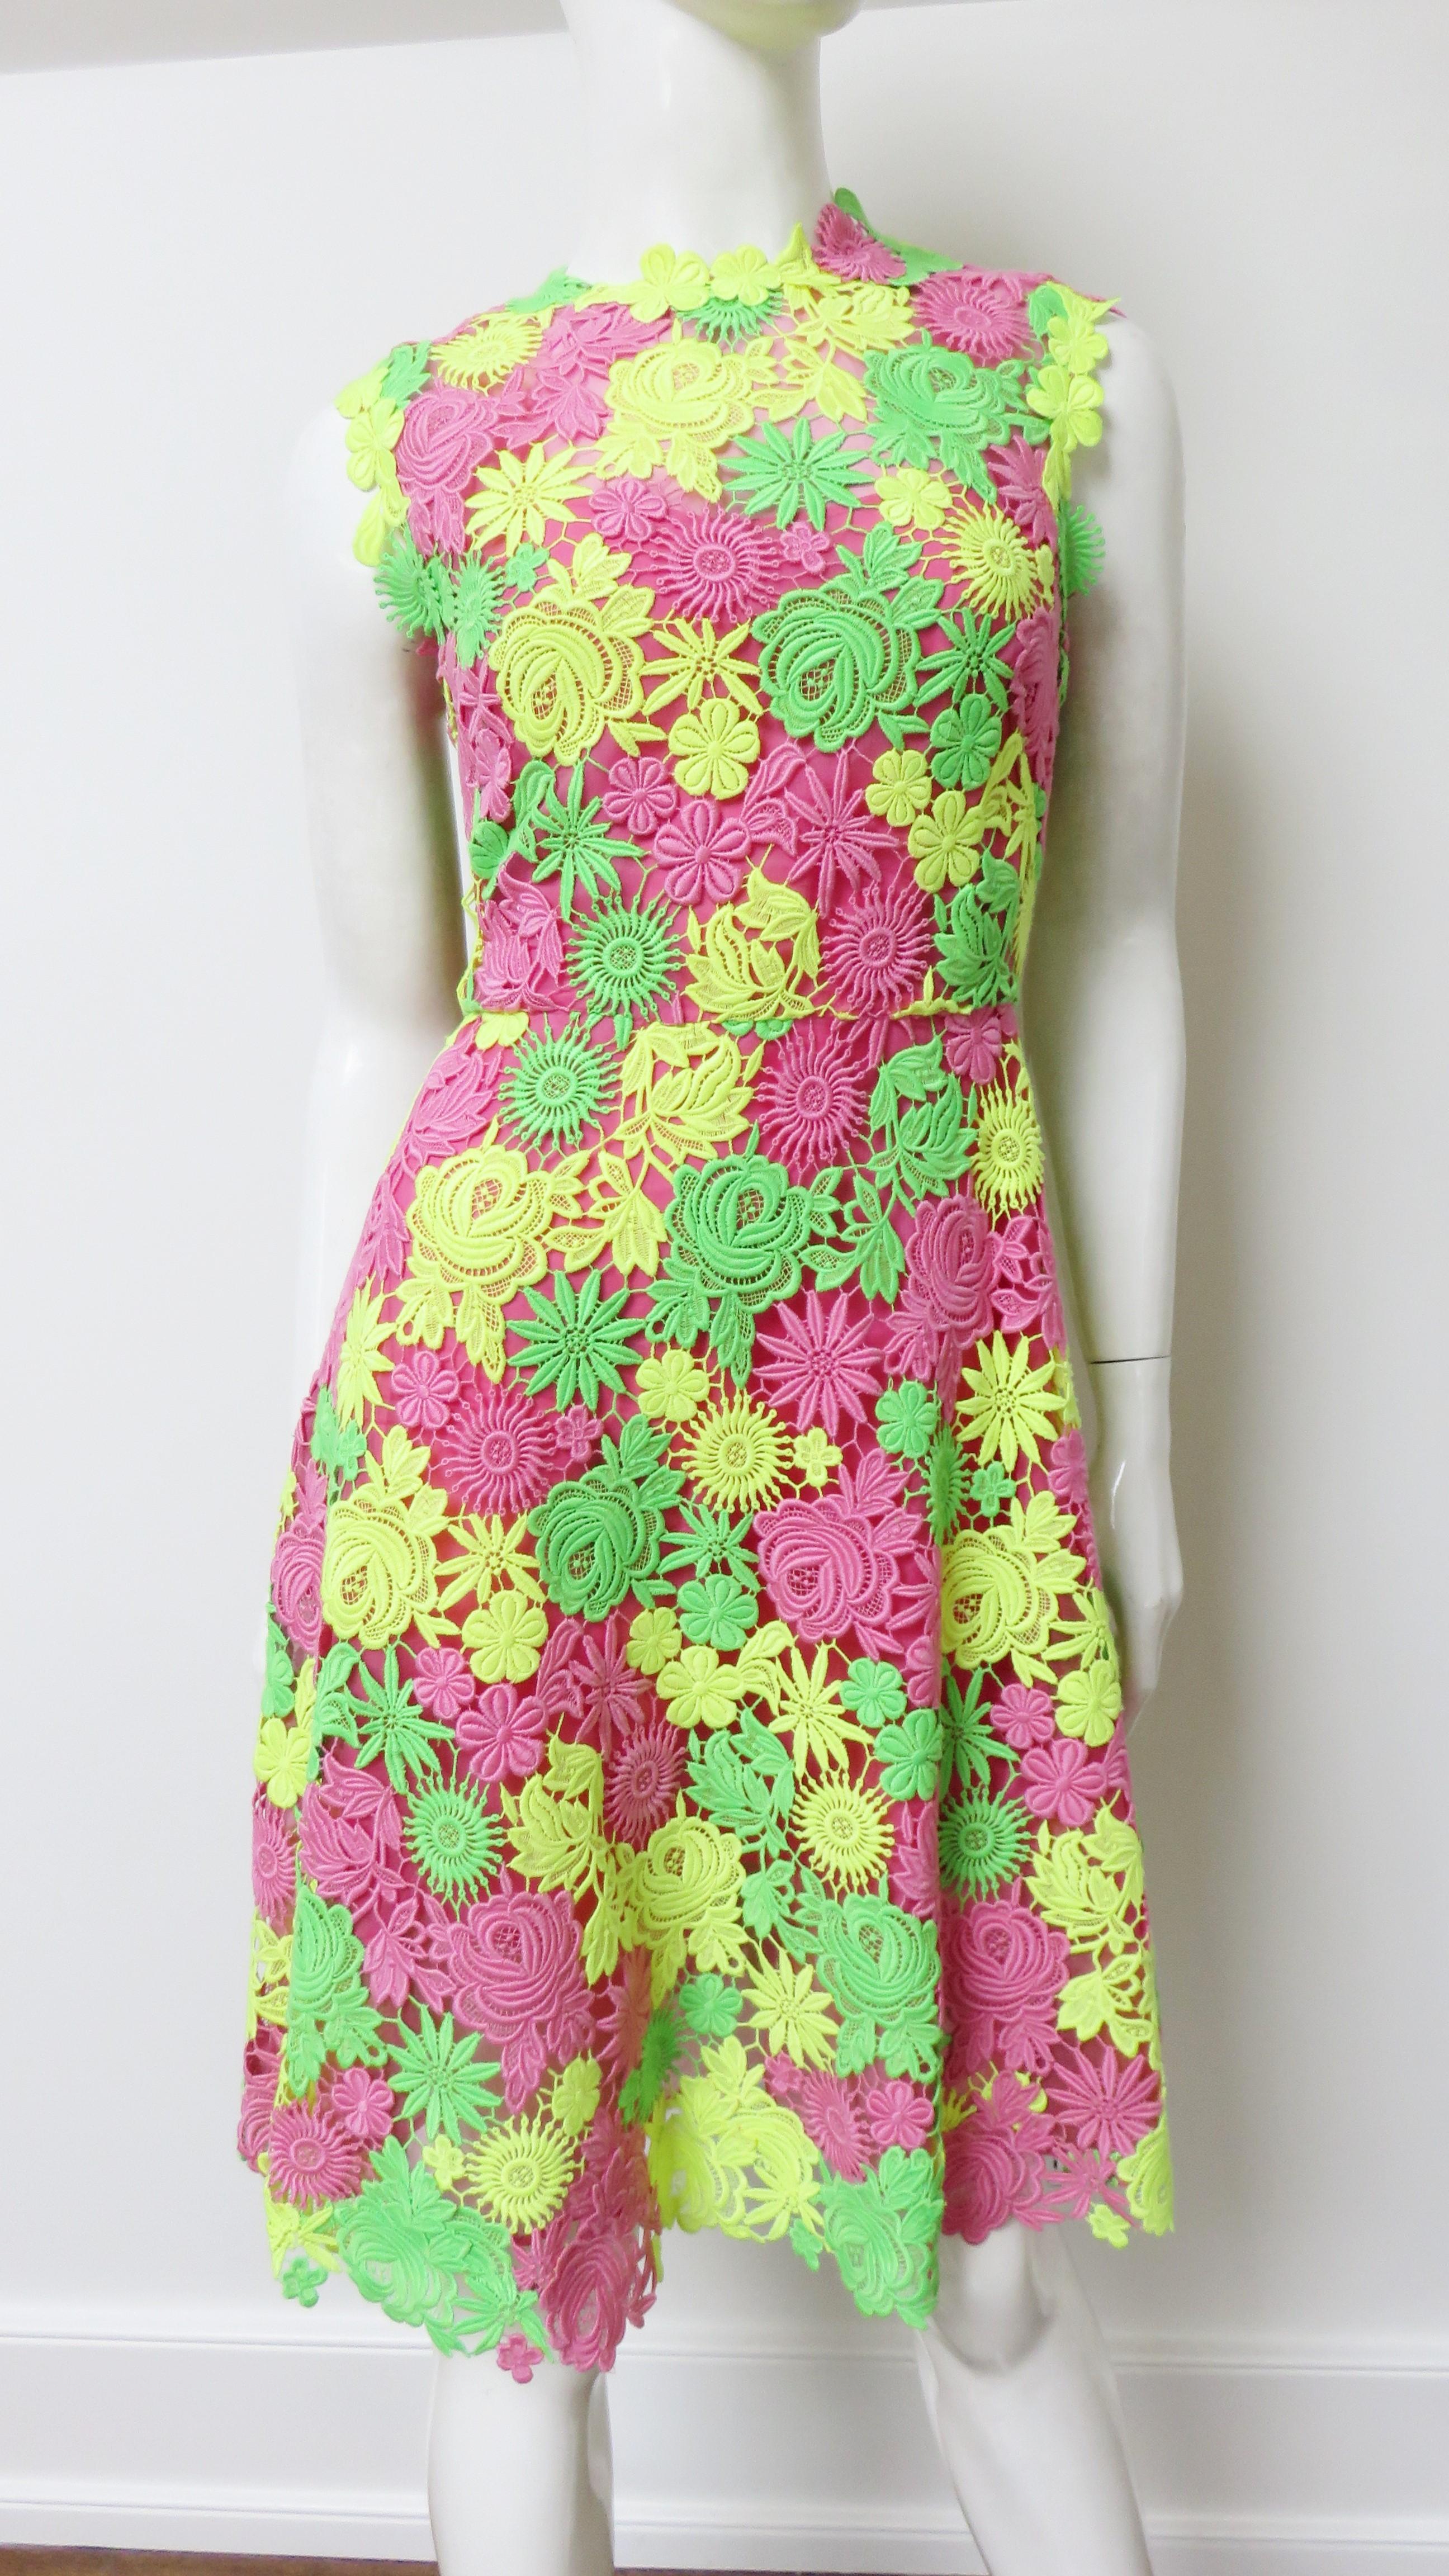 A gorgeous green, yellow and pink flower pattern lace dress from Valentino.  It is sleeveless with a crew neckline, fitted waist and full skirt. The dress is lined in pink silk and has a back zipper.
Fits size Medium. Marked Italian size 44.

Bust 